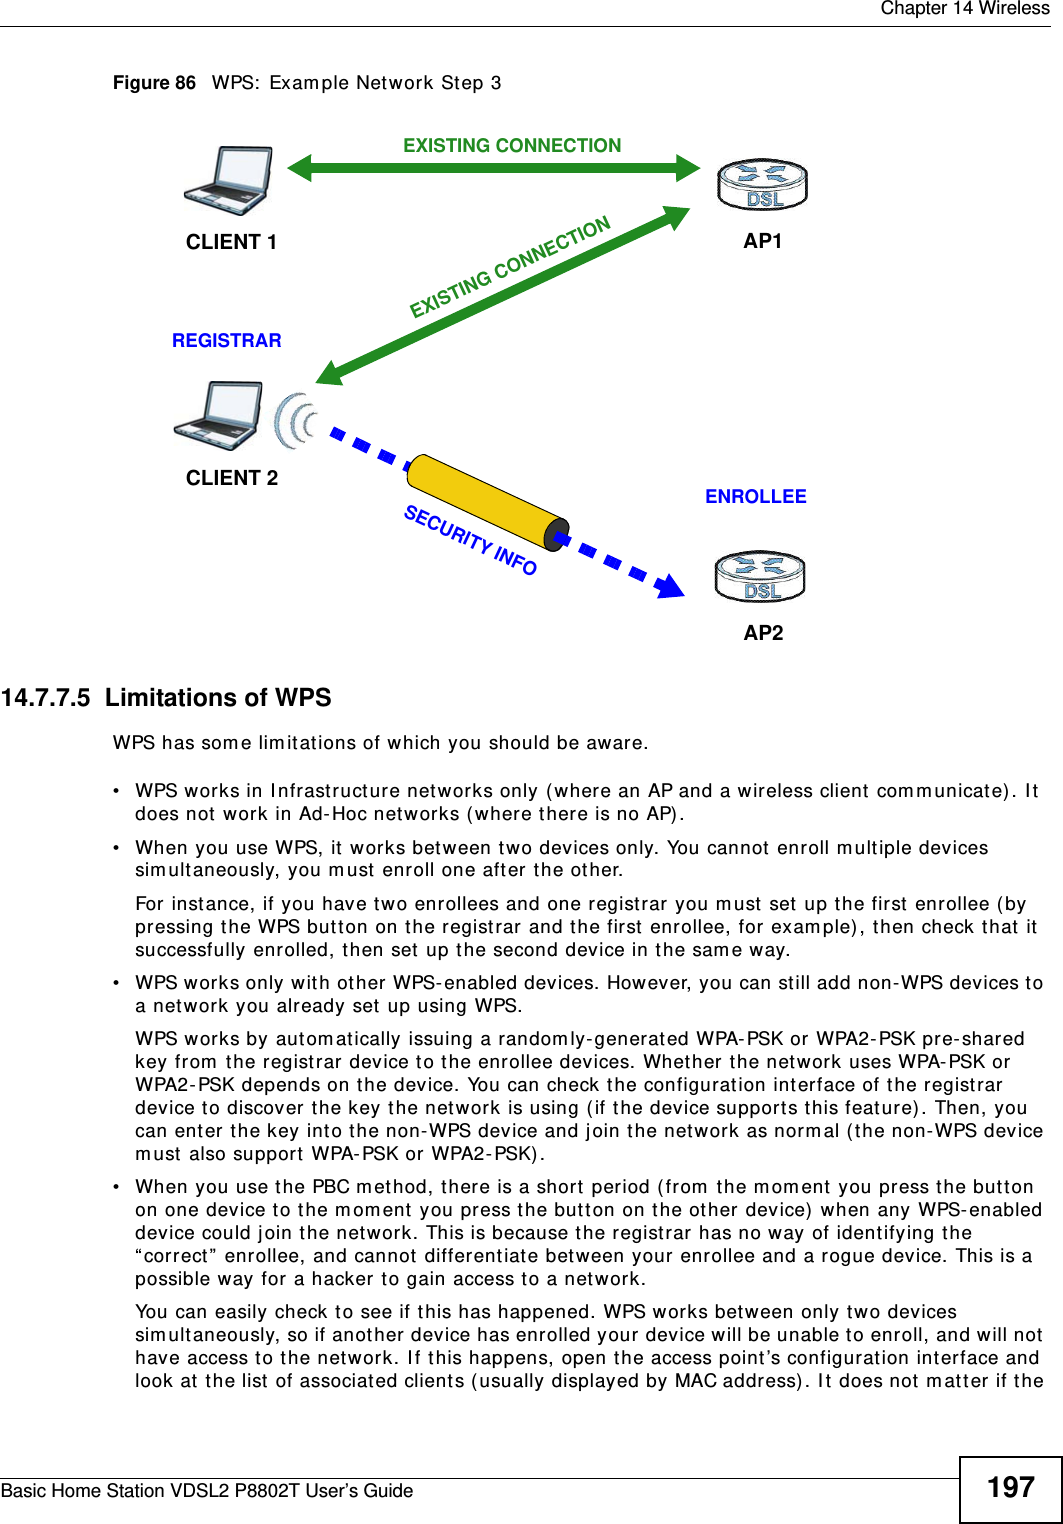  Chapter 14 WirelessBasic Home Station VDSL2 P8802T User’s Guide 197Figure 86   WPS:  Exam ple Net work St ep 314.7.7.5  Limitations of WPSWPS has som e lim itat ions of which you should be aware. • WPS works in I nfrastruct ure net works only ( where an AP and a wireless client  com m unicat e). I t does not work in Ad- Hoc net works ( wher e there is no AP) .• When you use WPS, it  works bet ween two devices only. You cannot enroll m ultiple devices sim ult aneously, you m ust enroll one aft er t he ot her. For  inst ance, if you have two enrollees and one regist rar you m ust set  up the first  enrollee ( by pressing the WPS butt on on the r egist rar and t he first  enrollee, for exam ple) , then check t hat it successfully enrolled, then set up the second device in the sam e way.• WPS works only wit h ot her WPS- enabled devices. However, you can st ill add non-WPS devices t o a net work you already set  up using WPS. WPS works by aut om atically issuing a random ly-generated WPA- PSK or WPA2- PSK pre- shared key from  t he regist rar device t o t he enrollee devices. Whether t he net work uses WPA-PSK or WPA2- PSK depends on t he device. You can check t he configurat ion int erface of the regist rar device t o discover the key the network is using (if t he device supports t his feature) . Then, you can ent er the key int o the non-WPS device and j oin the net work as norm al (t he non-WPS device m ust also support  WPA-PSK or WPA2- PSK) .• When you use the PBC m et hod, t here is a short period ( from  t he m om ent  you press t he butt on on one device t o the mom ent you press the butt on on the other device)  when any WPS- enabled device could join t he net work. This is because t he regist rar has no way of ident ifying t he “ correct ”  enrollee, and cannot different iate between your enrollee and a rogue device. This is a possible way for a hacker to gain access t o a network.You can easily check t o see if this has happened. WPS works bet ween only two devices sim ultaneously, so if another device has enrolled your device w ill be unable t o enroll, and will not  have access t o the network. I f this happens, open t he access point’s configuration interface and look at  t he list  of associat ed client s ( usually displayed by MAC address) . I t does not  m att er if the CLIENT 1 AP1REGISTRARCLIENT 2EXISTING CONNECTIONSECURITY INFOENROLLEEAP2EXISTING CONNECTION